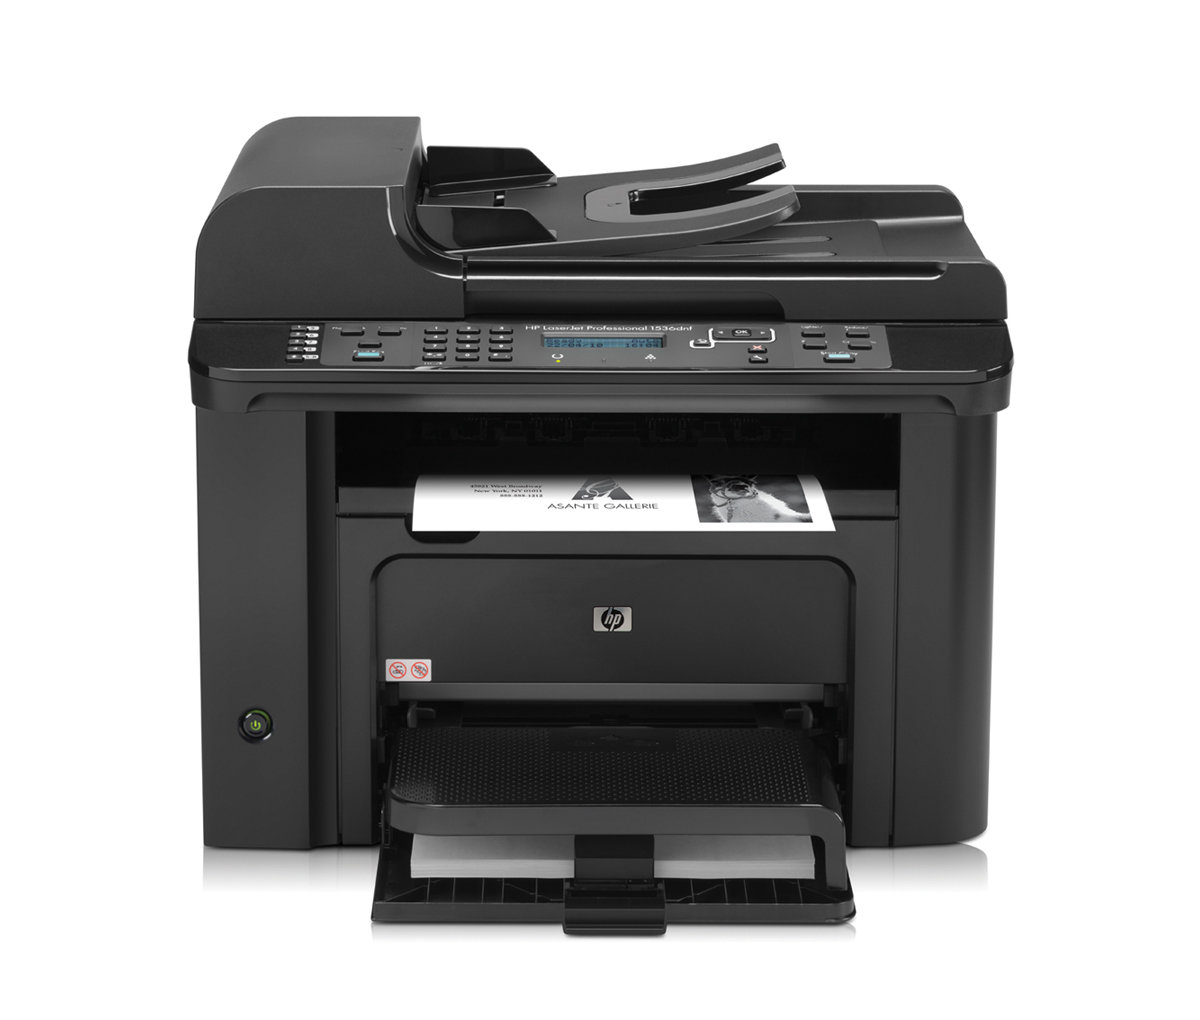 http://thetechjournal.com/wp-content/uploads/images/1110/1317608662-hp-laserjet-pro-m1536dnf-printer-can-print-up-to-26-ppm-1.jpg